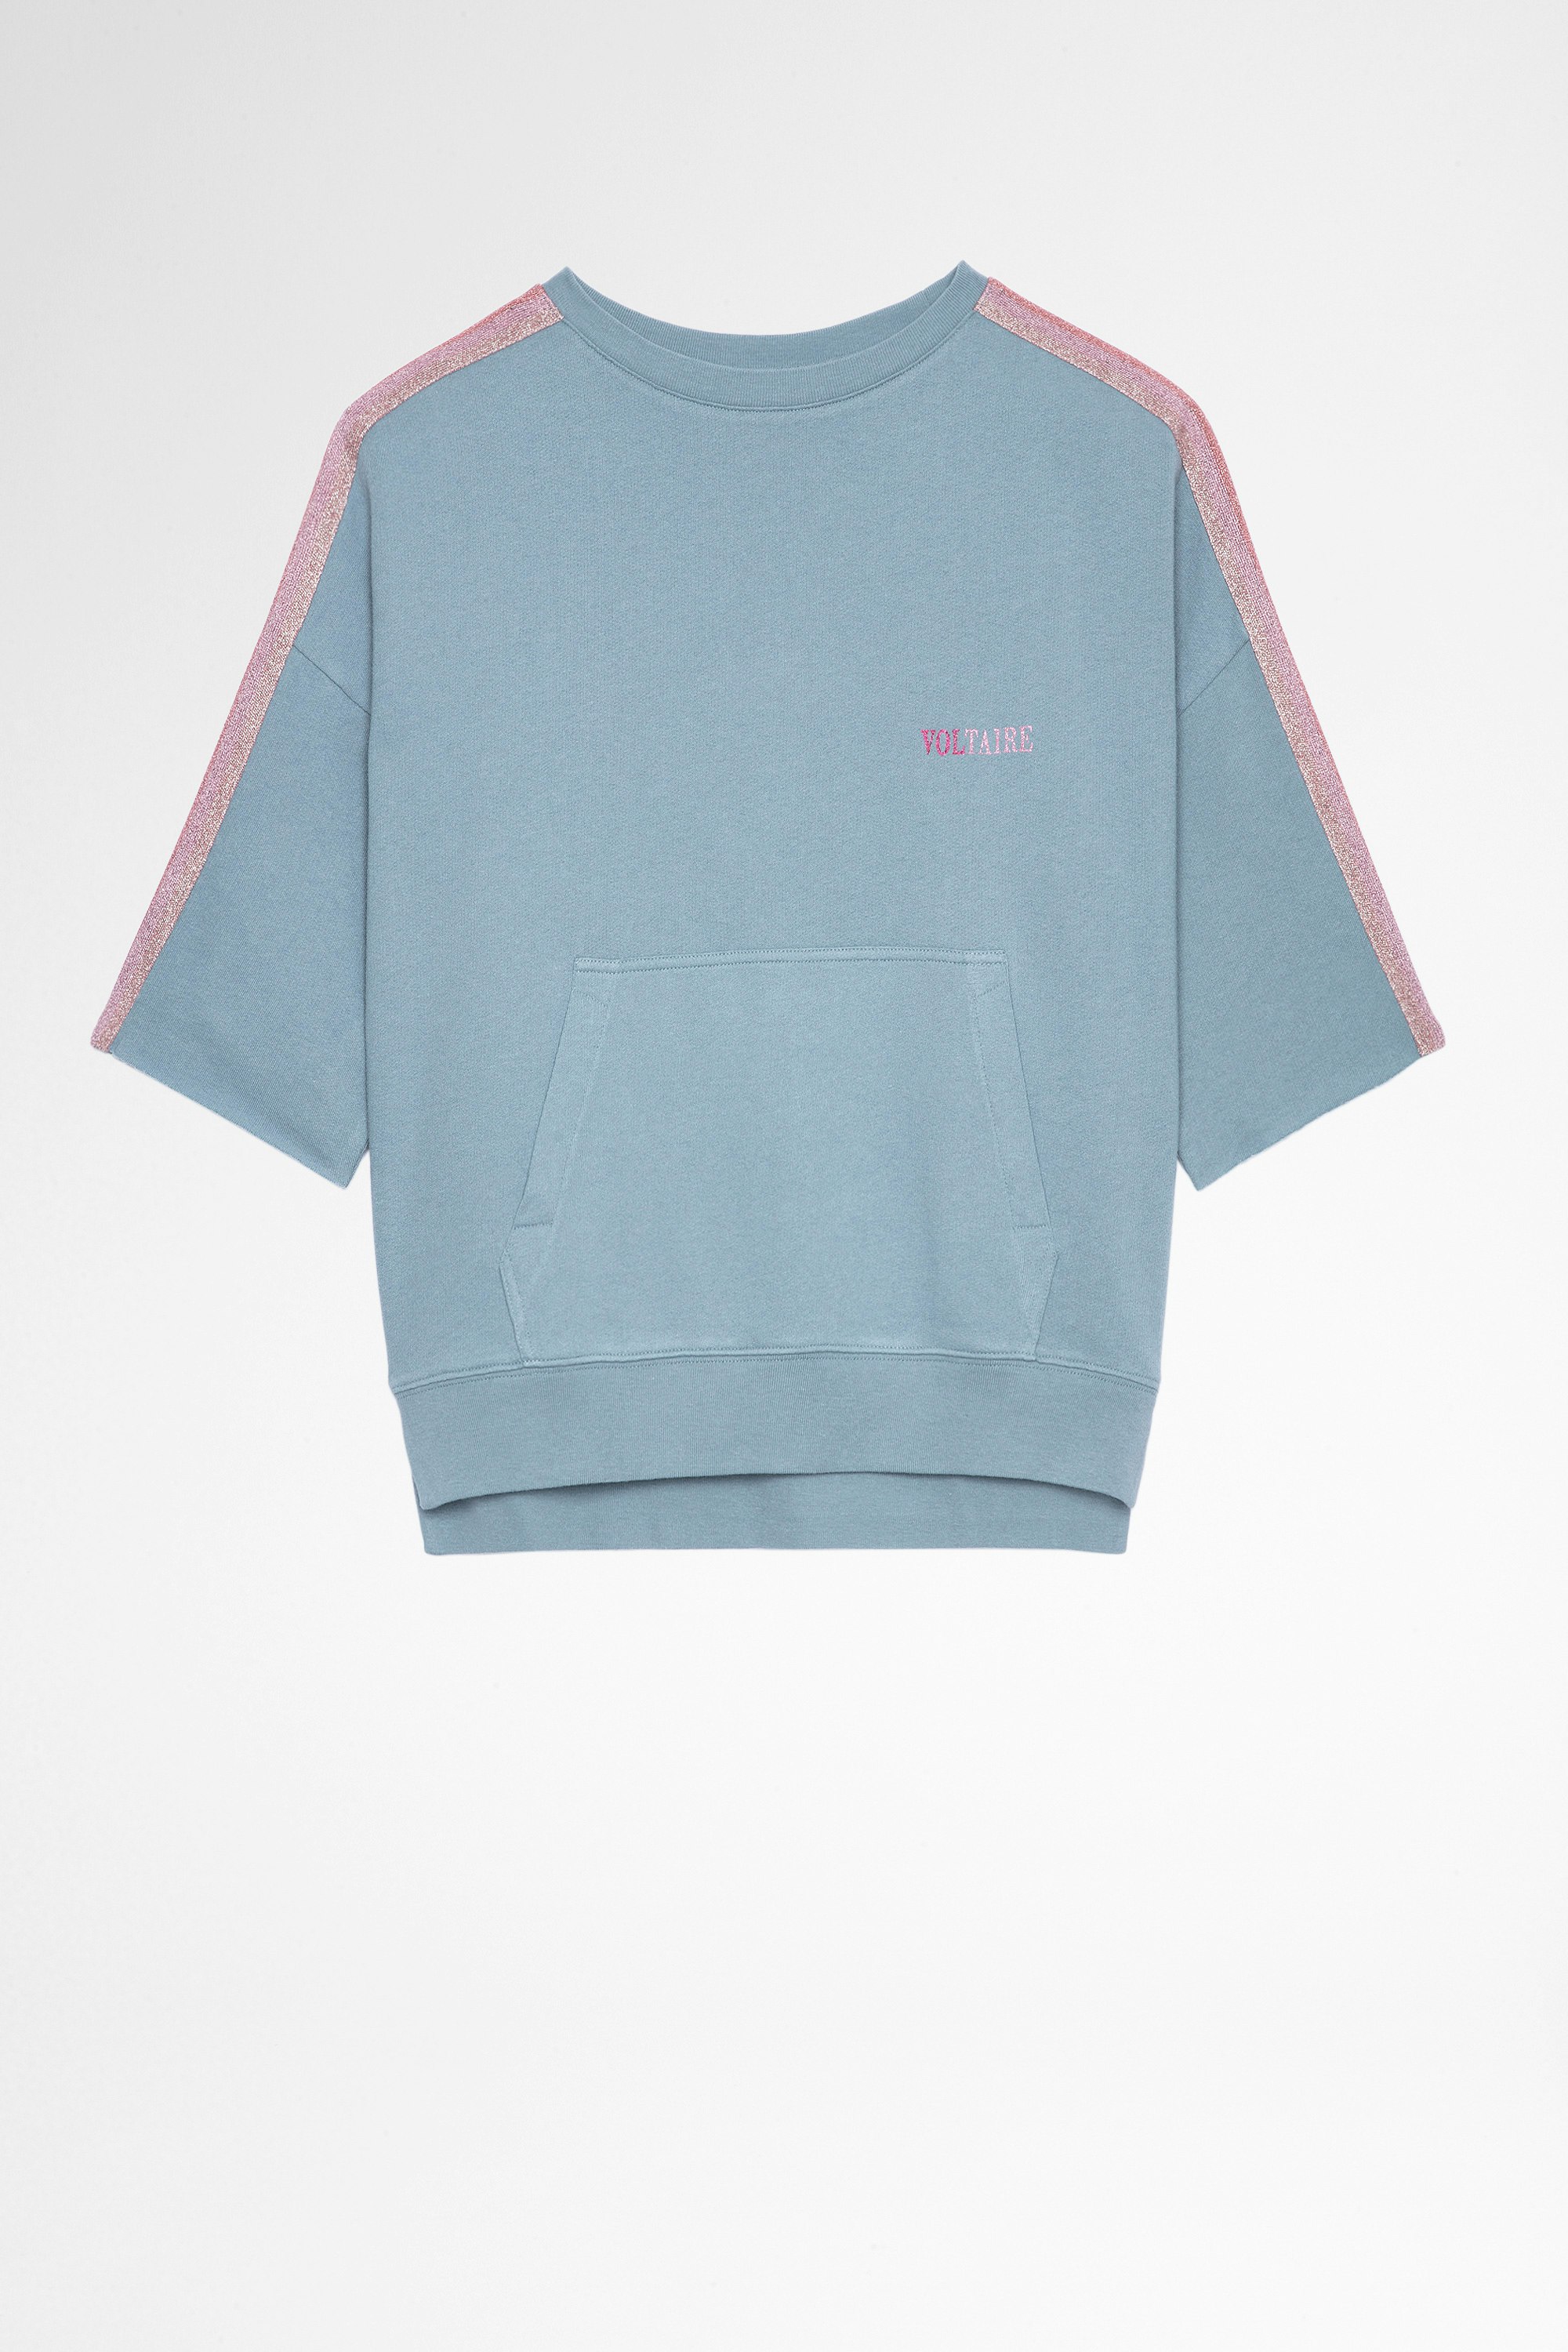 Kaly Bands スウェット Women's sky-blue cotton sweatshirt with short sleeves and colourful stripes